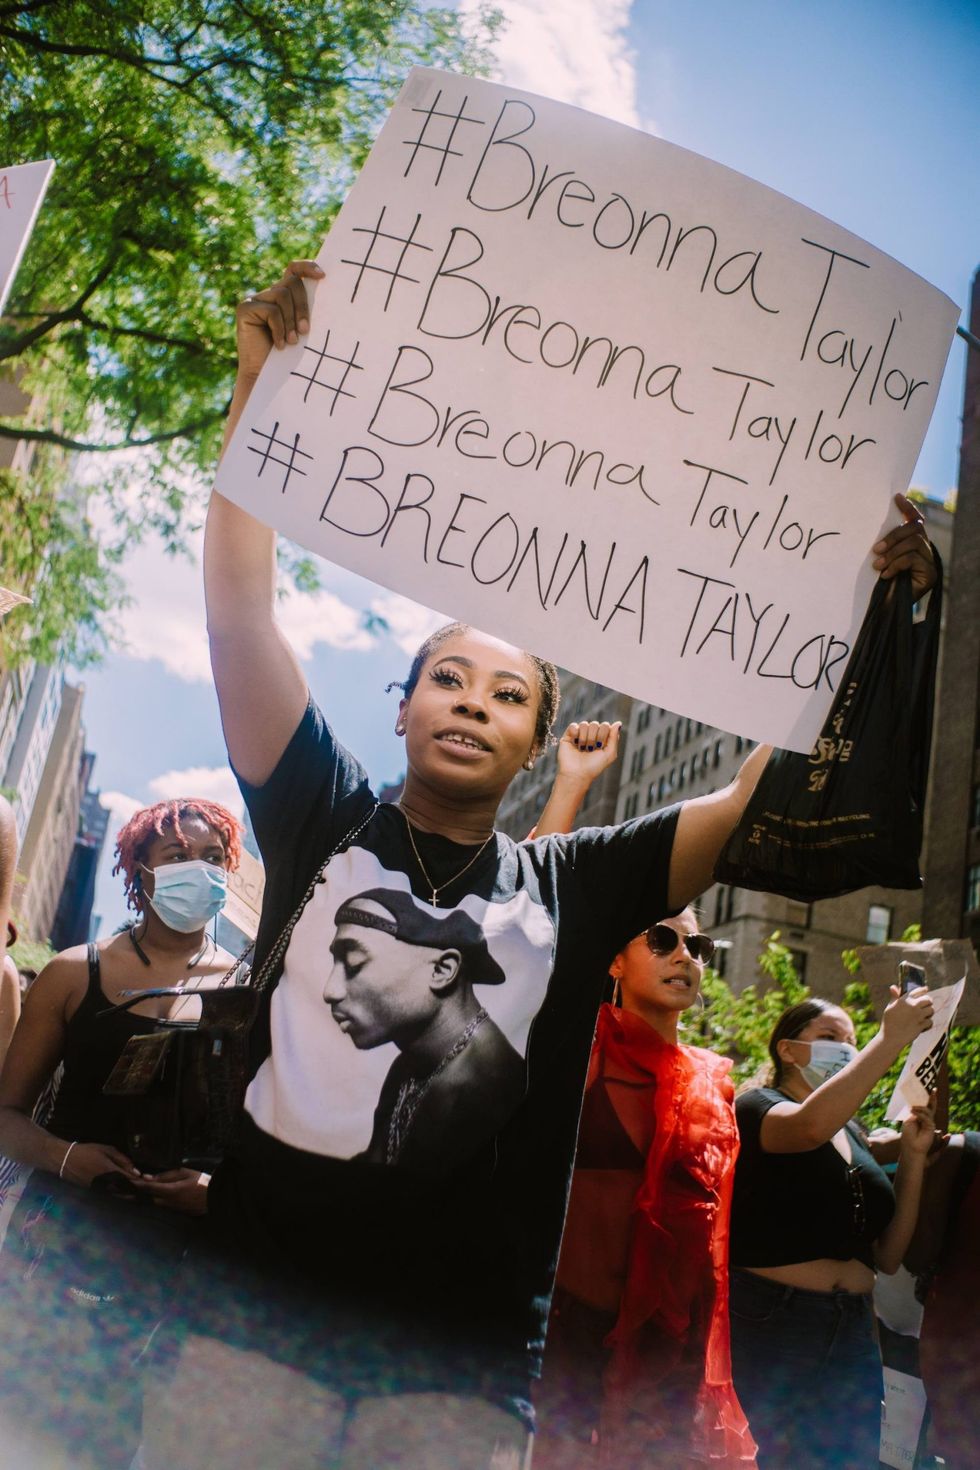 Women protester holding up sign for Breonna Taylor during protest